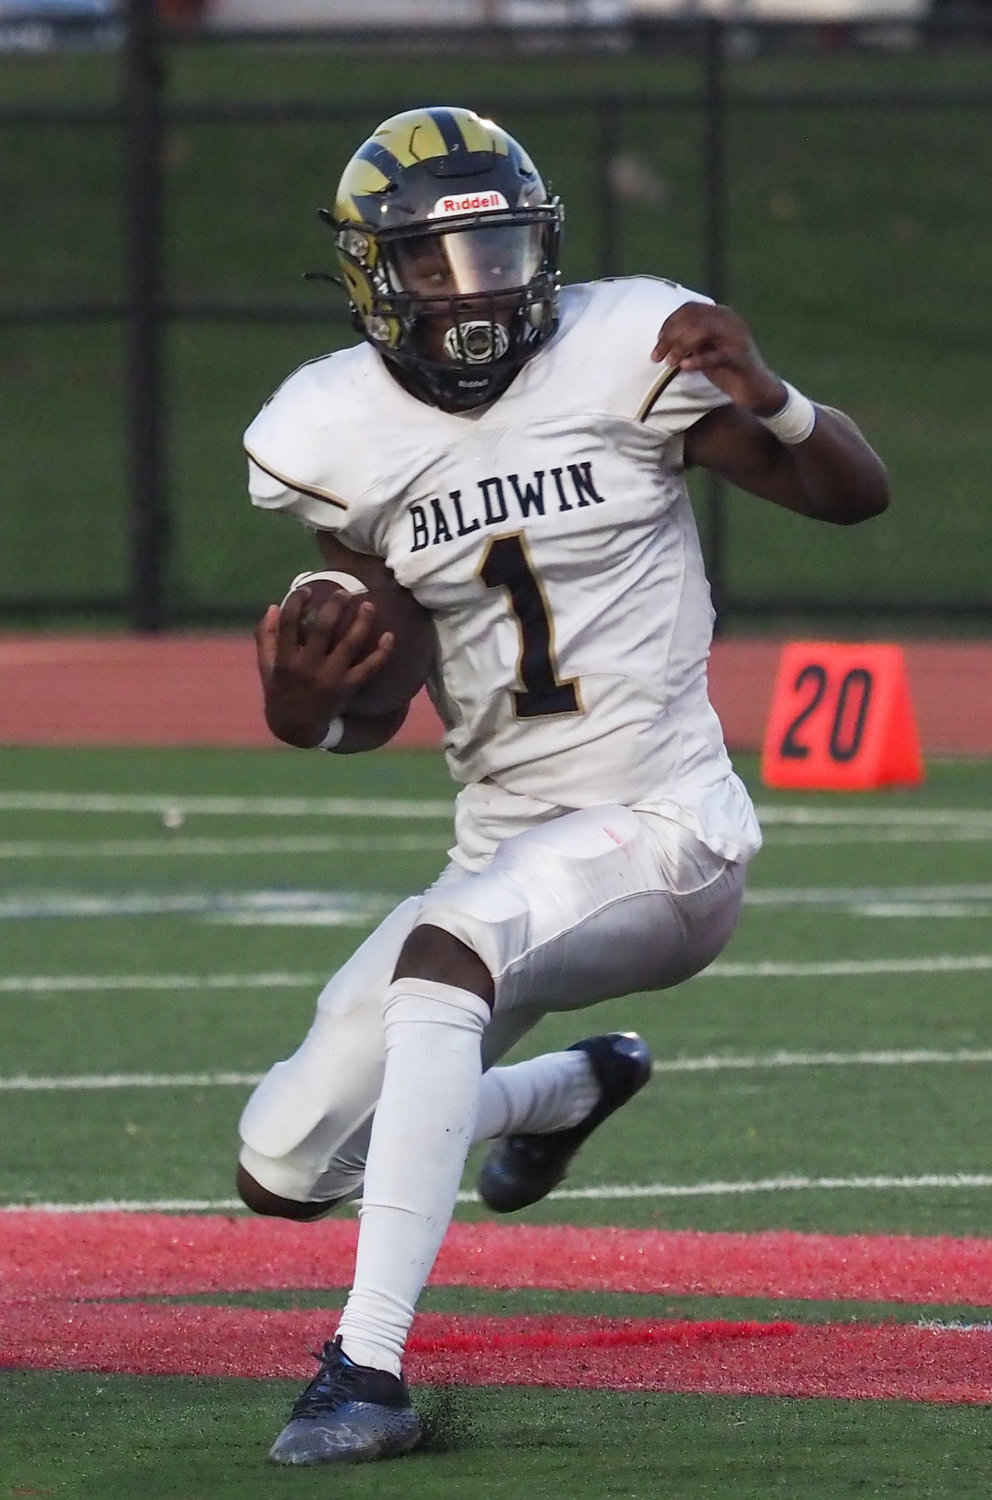 Baldwin sophomore quarterback Vaughdrea Johnson had 101 yards rushing and two touchdowns in Saturday's Conference I semifinal loss.